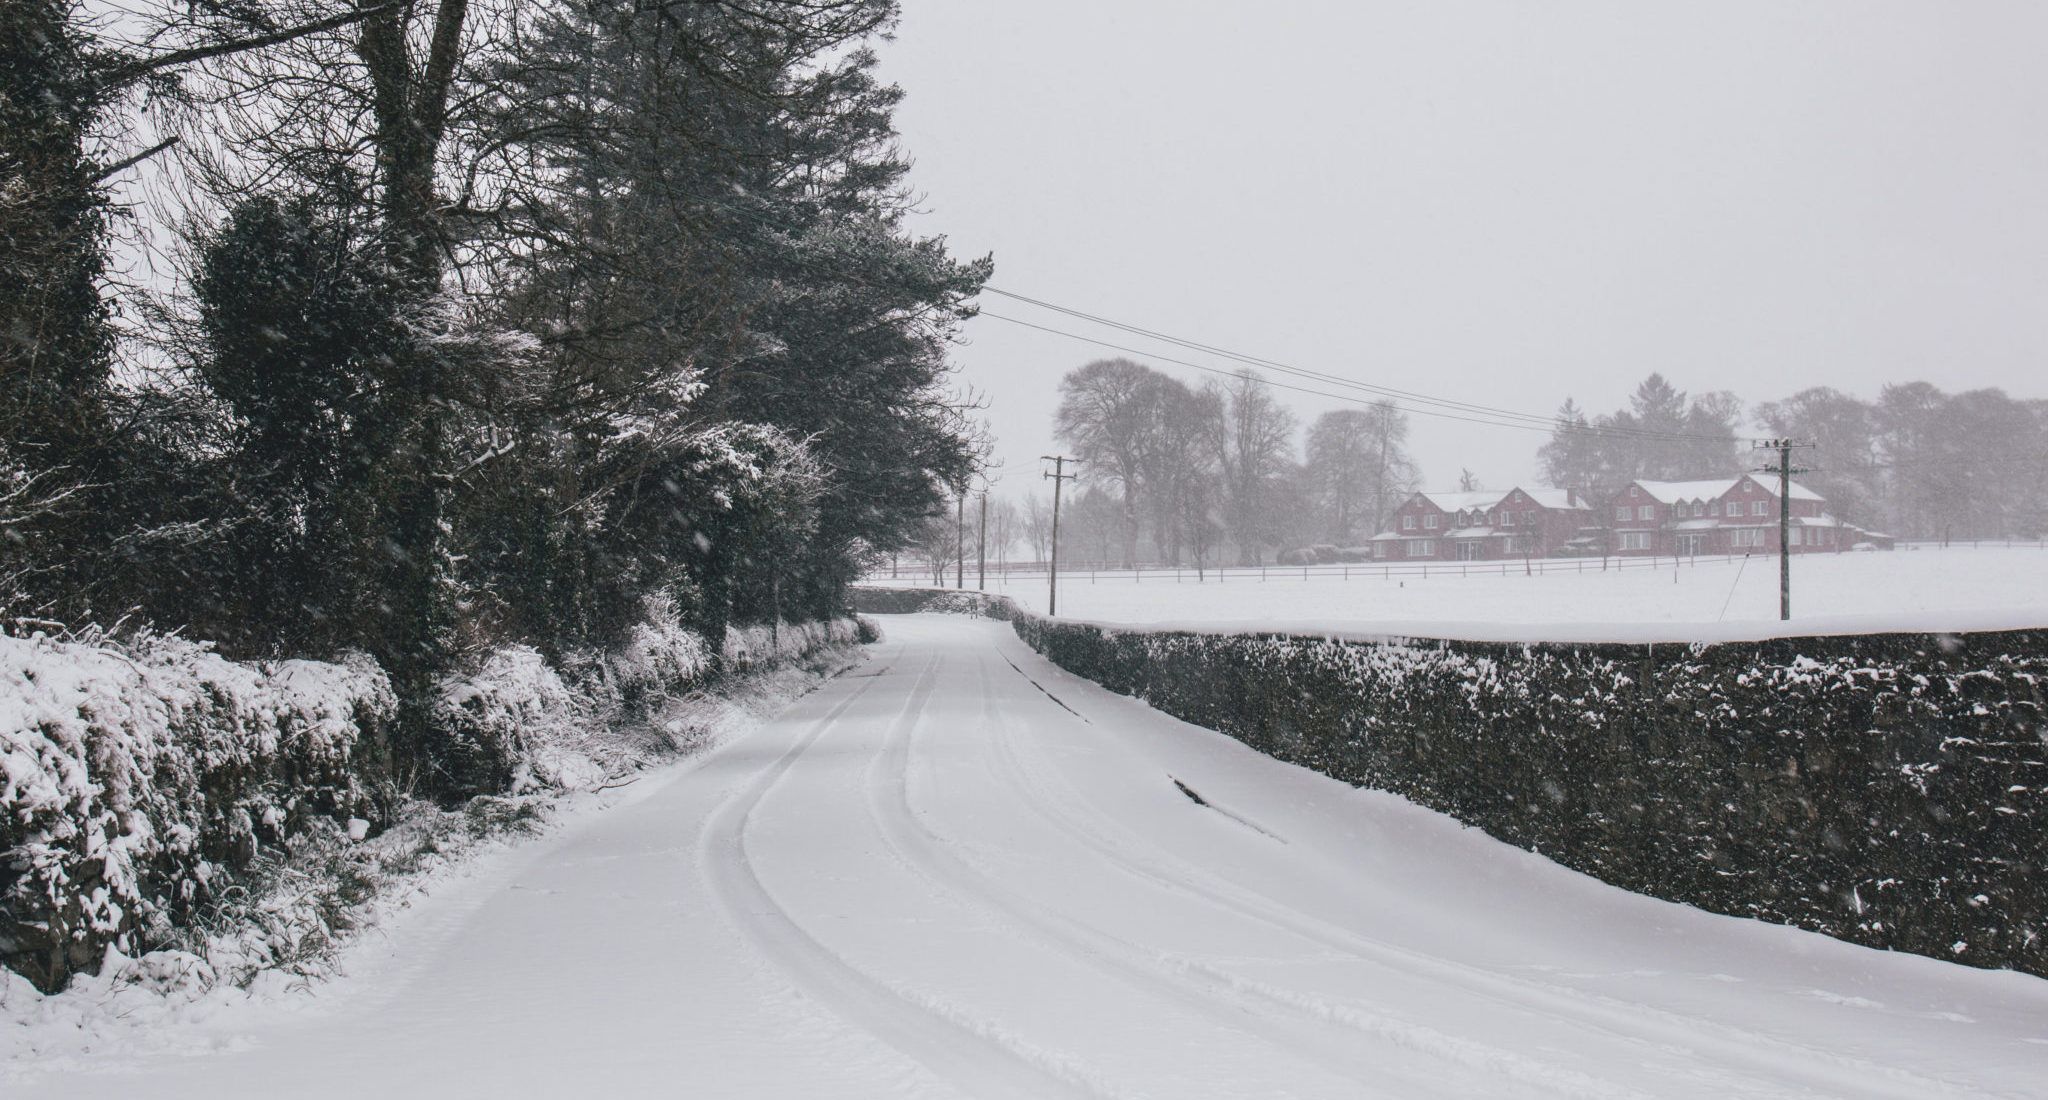 Temperatures to drop as low as -11 degrees in Ireland this week